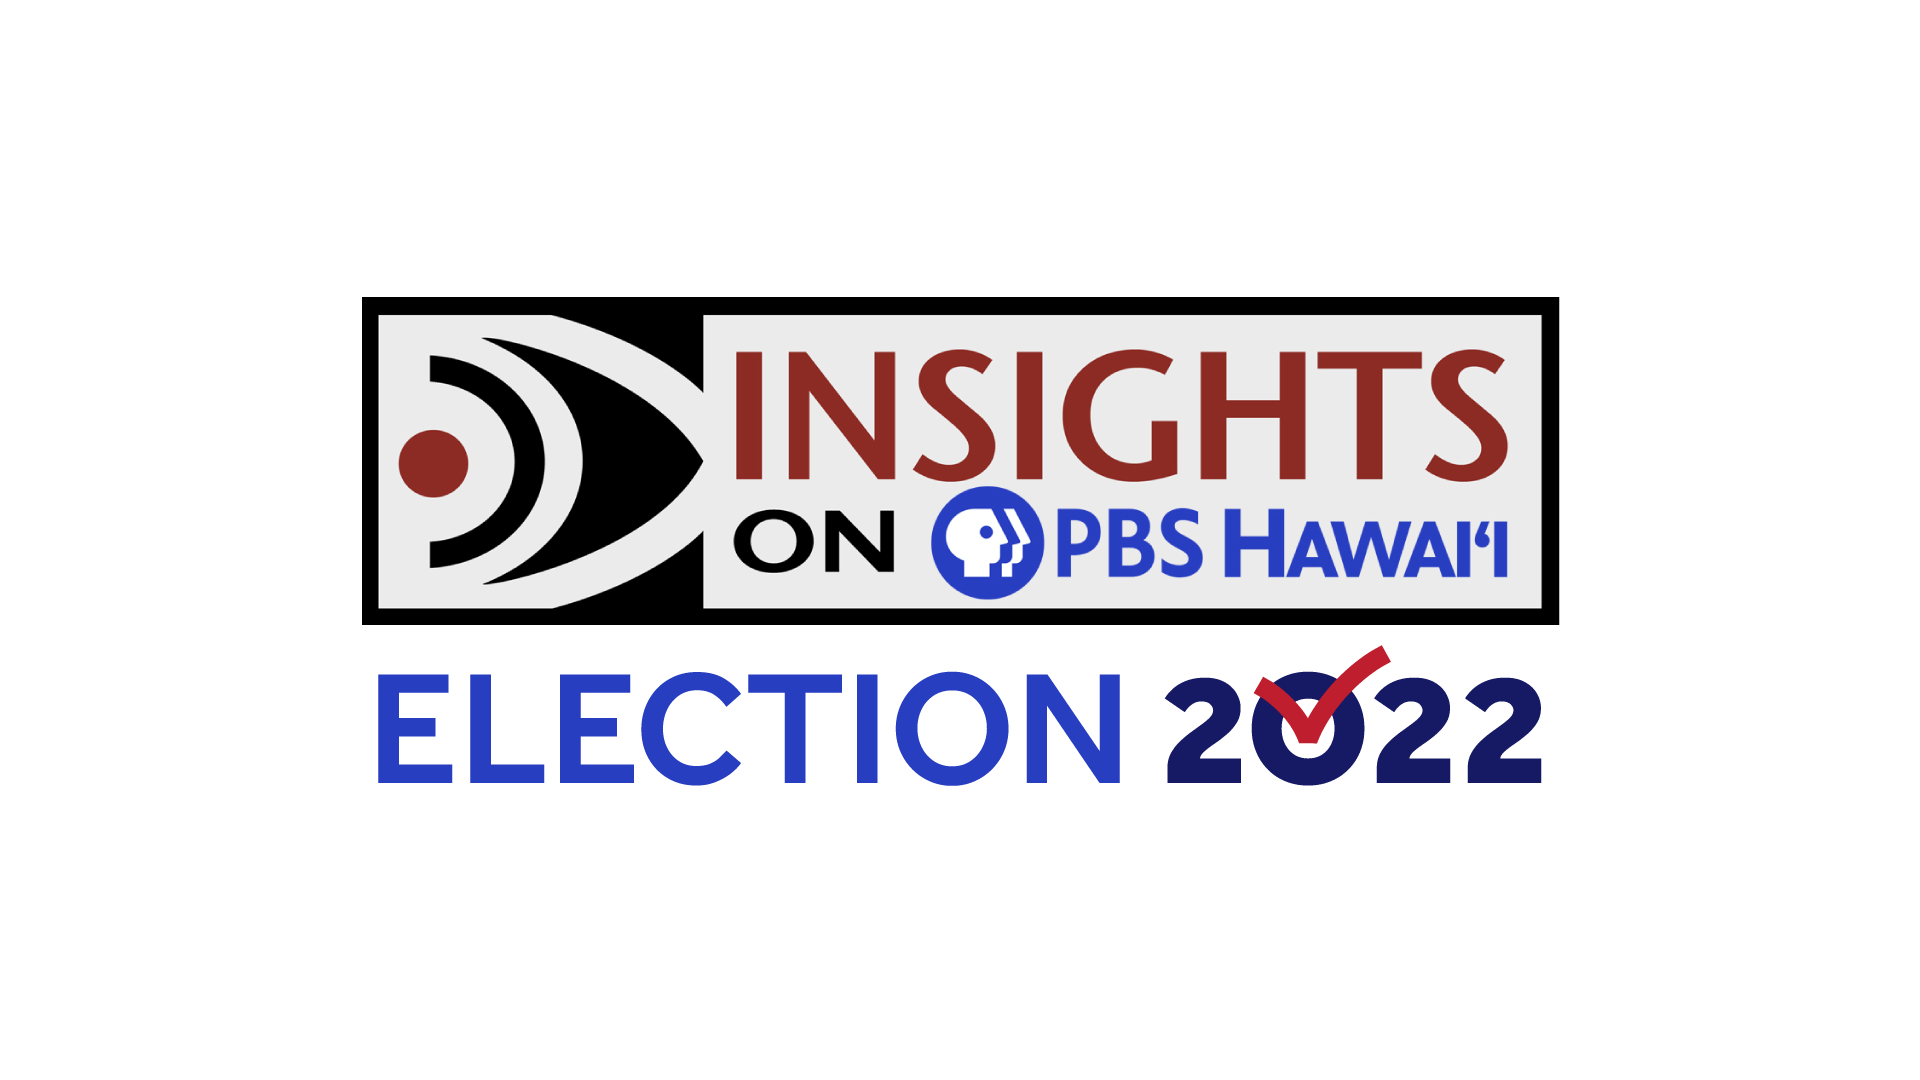 Election 2022 <br/>CANDIDATES: AUGUST 4 BROADCAST <br/>INSIGHTS ON PBS HAWAIʻI